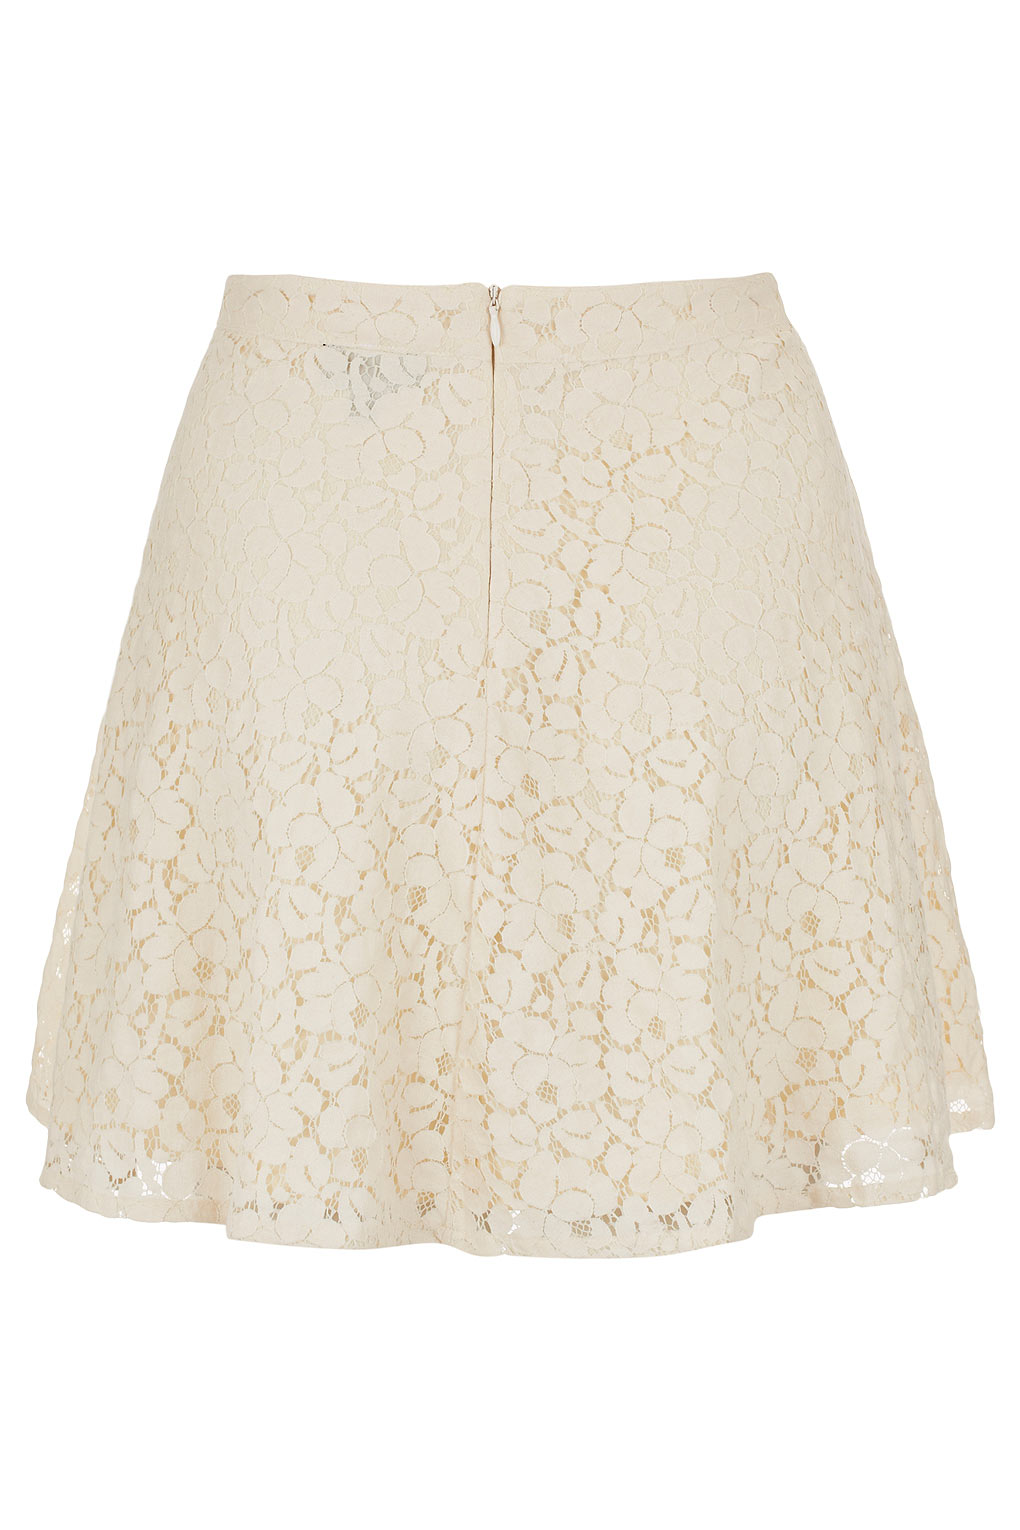 Lyst - Topshop Cream Lace Skater Skirt in Natural